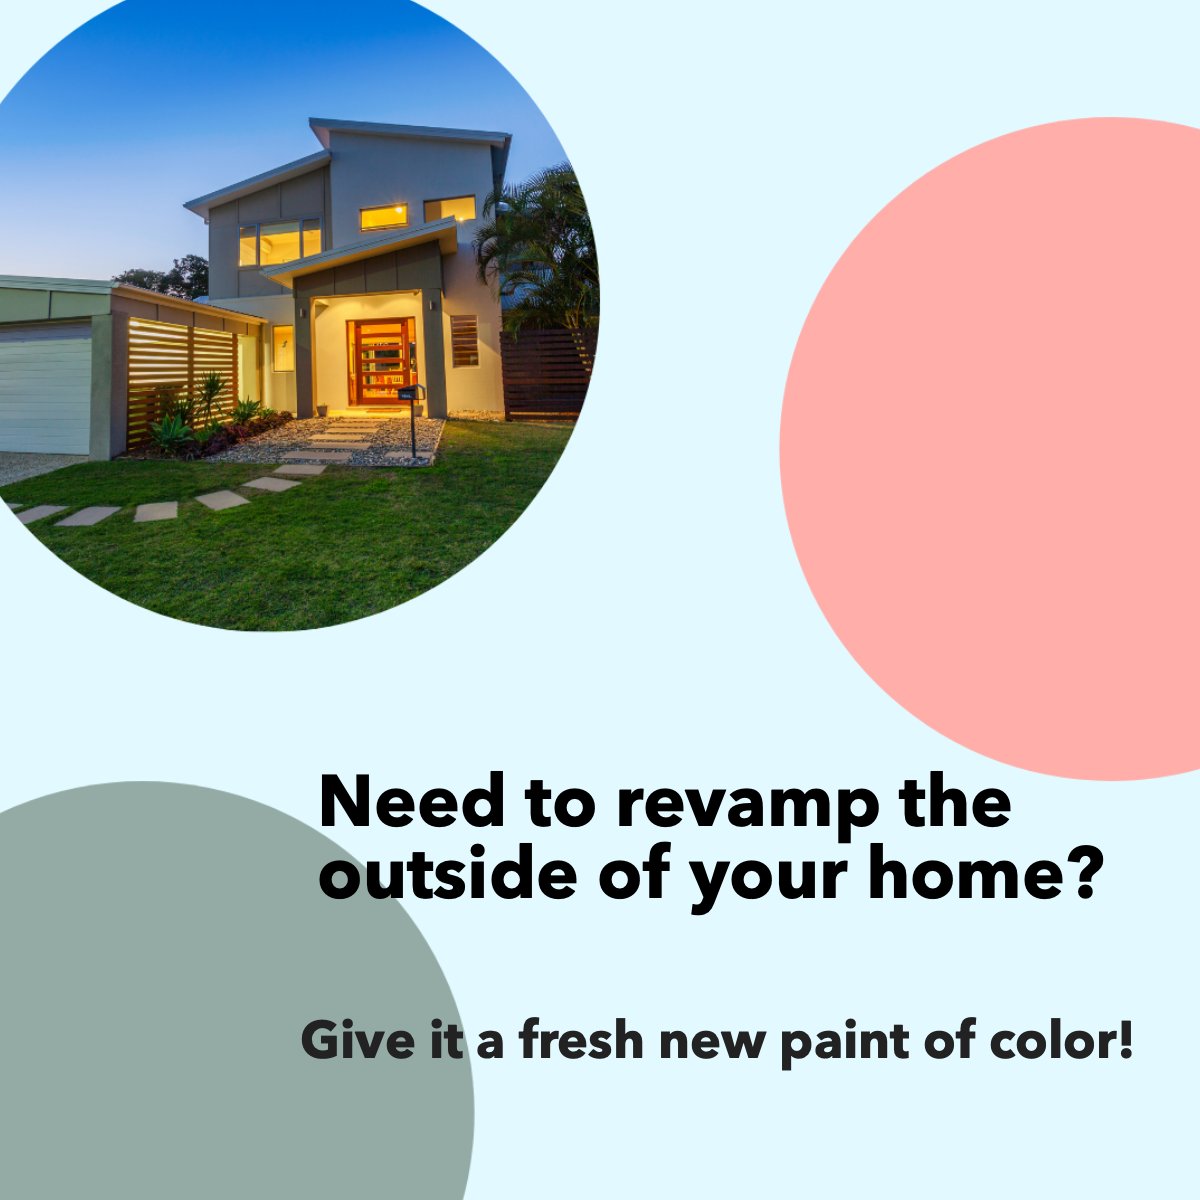 Need to revamp the outside of your home? 🎨

An exterior makeover can maximize curb appeal and give your home a whole new look. 😎

#paintingideas #paint #revamp
 #ElaineZacka #soldbyElaine #BonitaSprings #homevalue #napleshomes #newhomes #newlistings